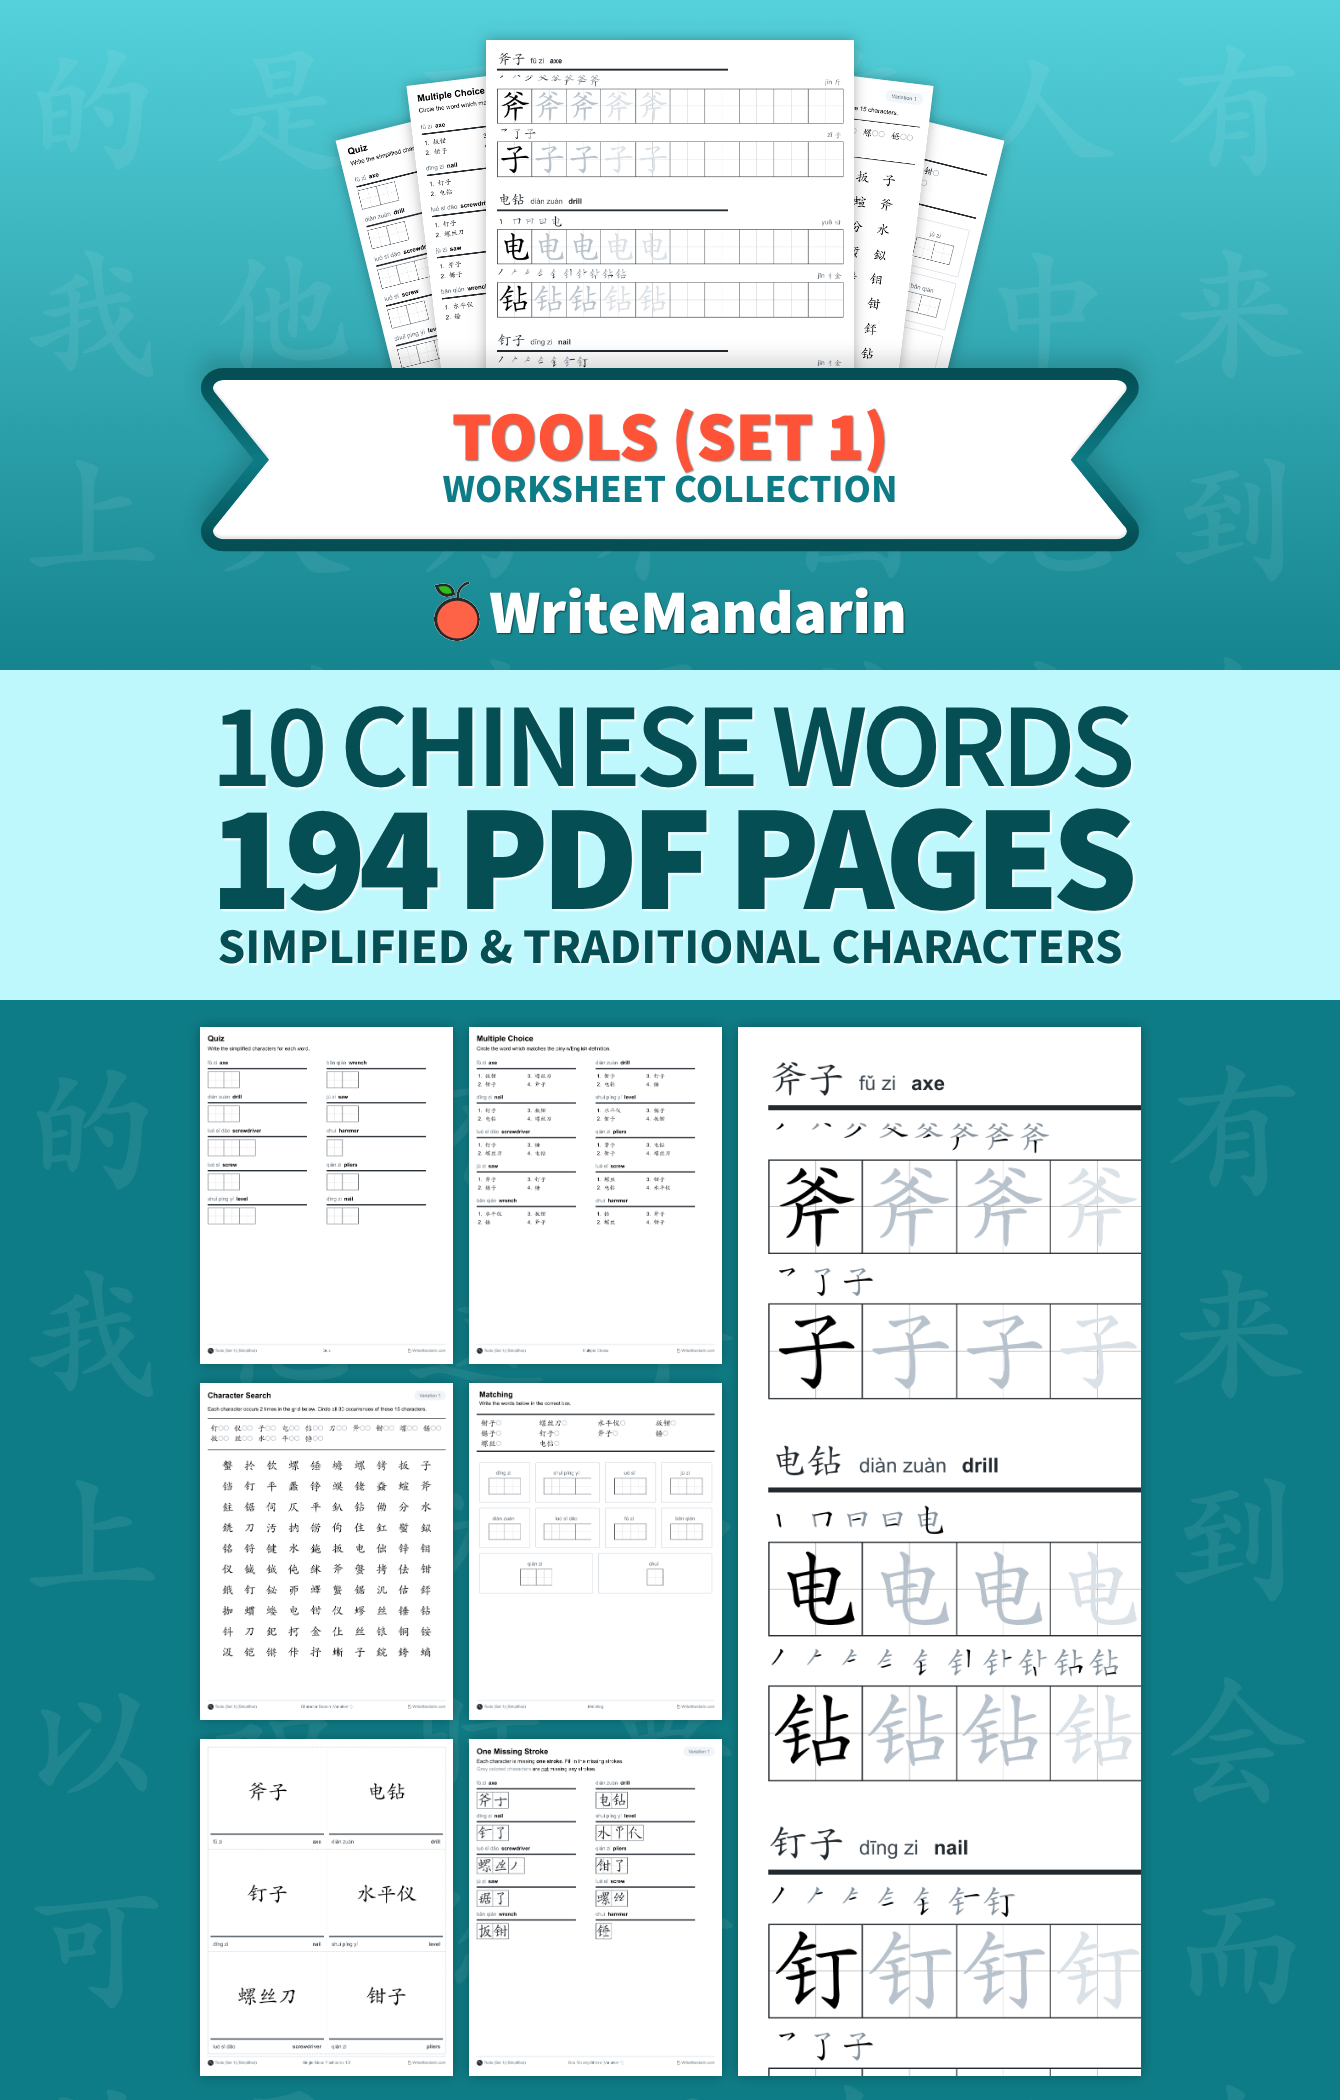 Preview image of Tools (Set 1) worksheet collection